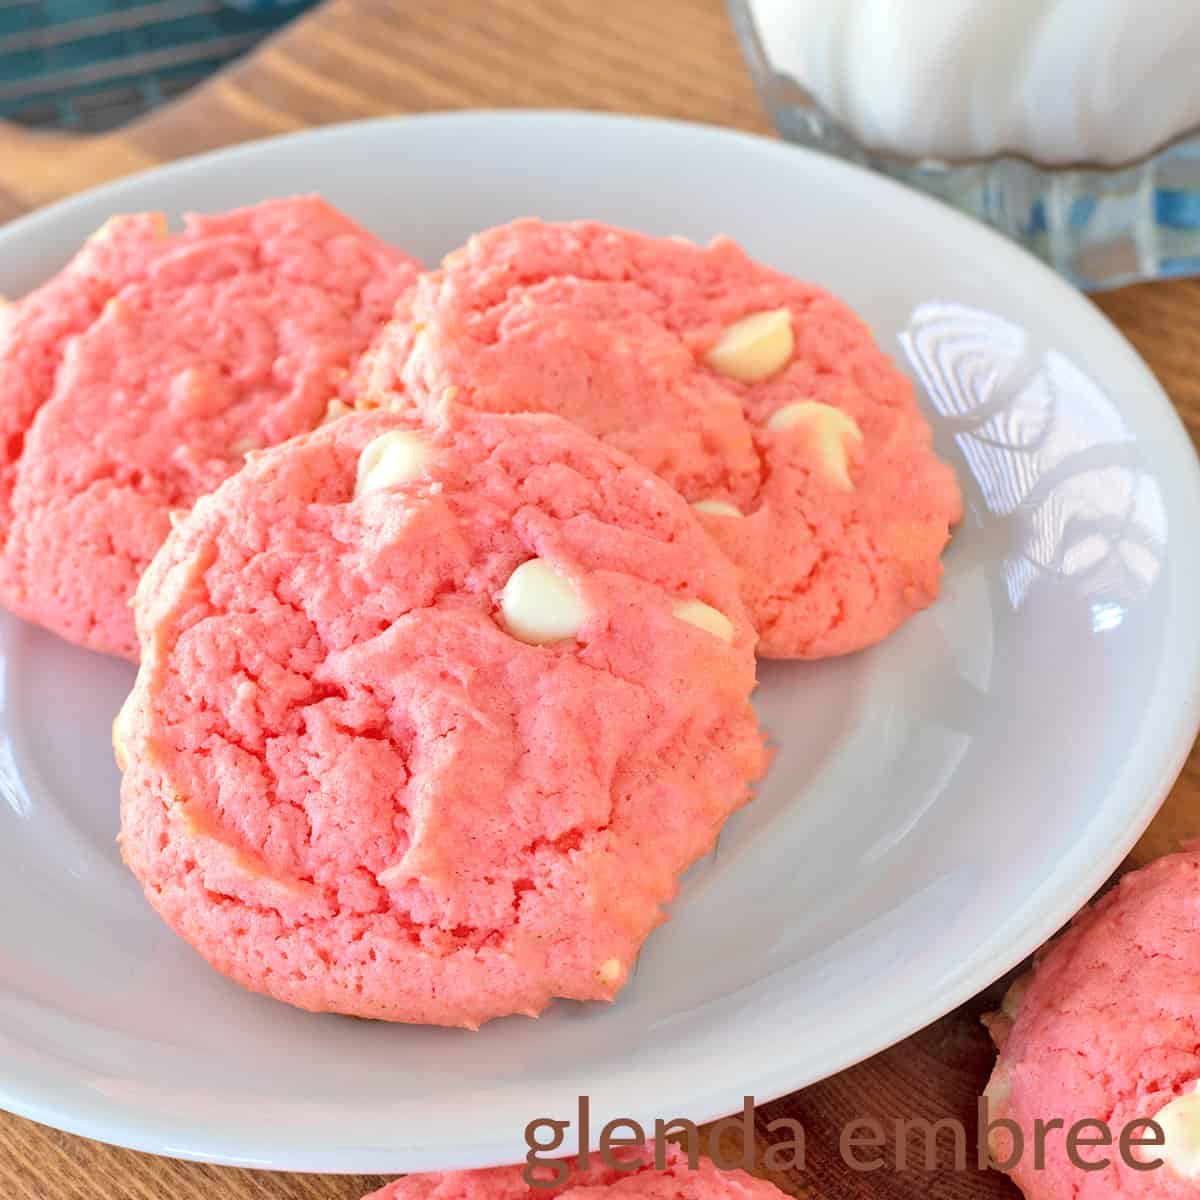 Strawberry Cake Mix Cookies are pink and dotted with white chocolate chips. Cookies and a glass of milk are on a white plate that is resting on a wooden trivet.